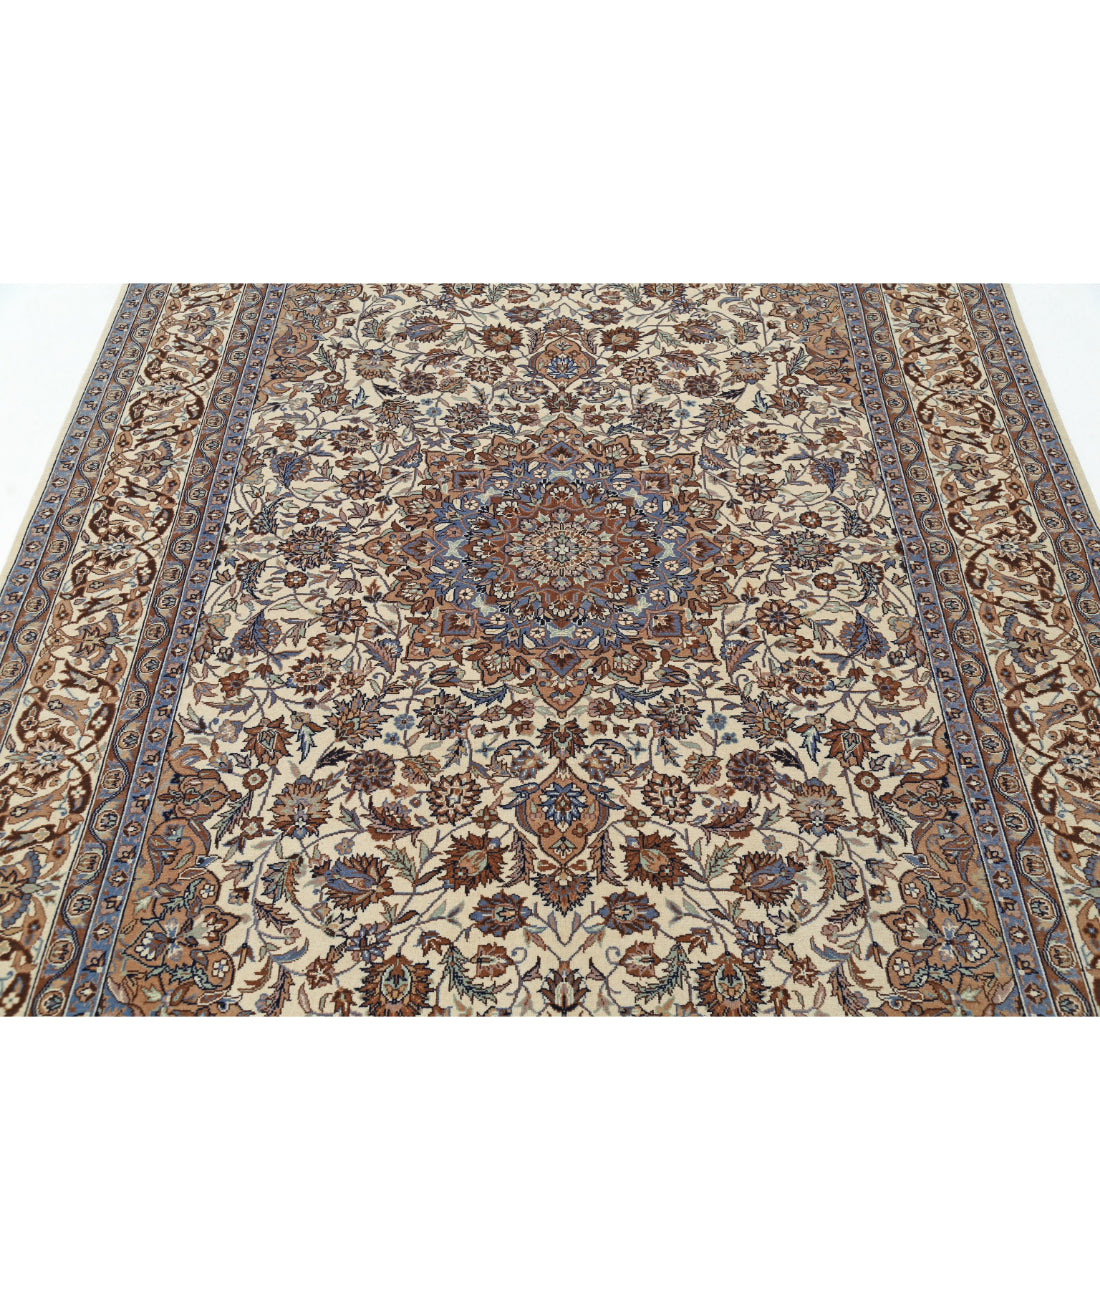 Hand Knotted Heritage Persian Style Wool Rug - 5'11'' x 8'11'' 5'11'' x 8'11'' (178 X 268) / Ivory / Blue